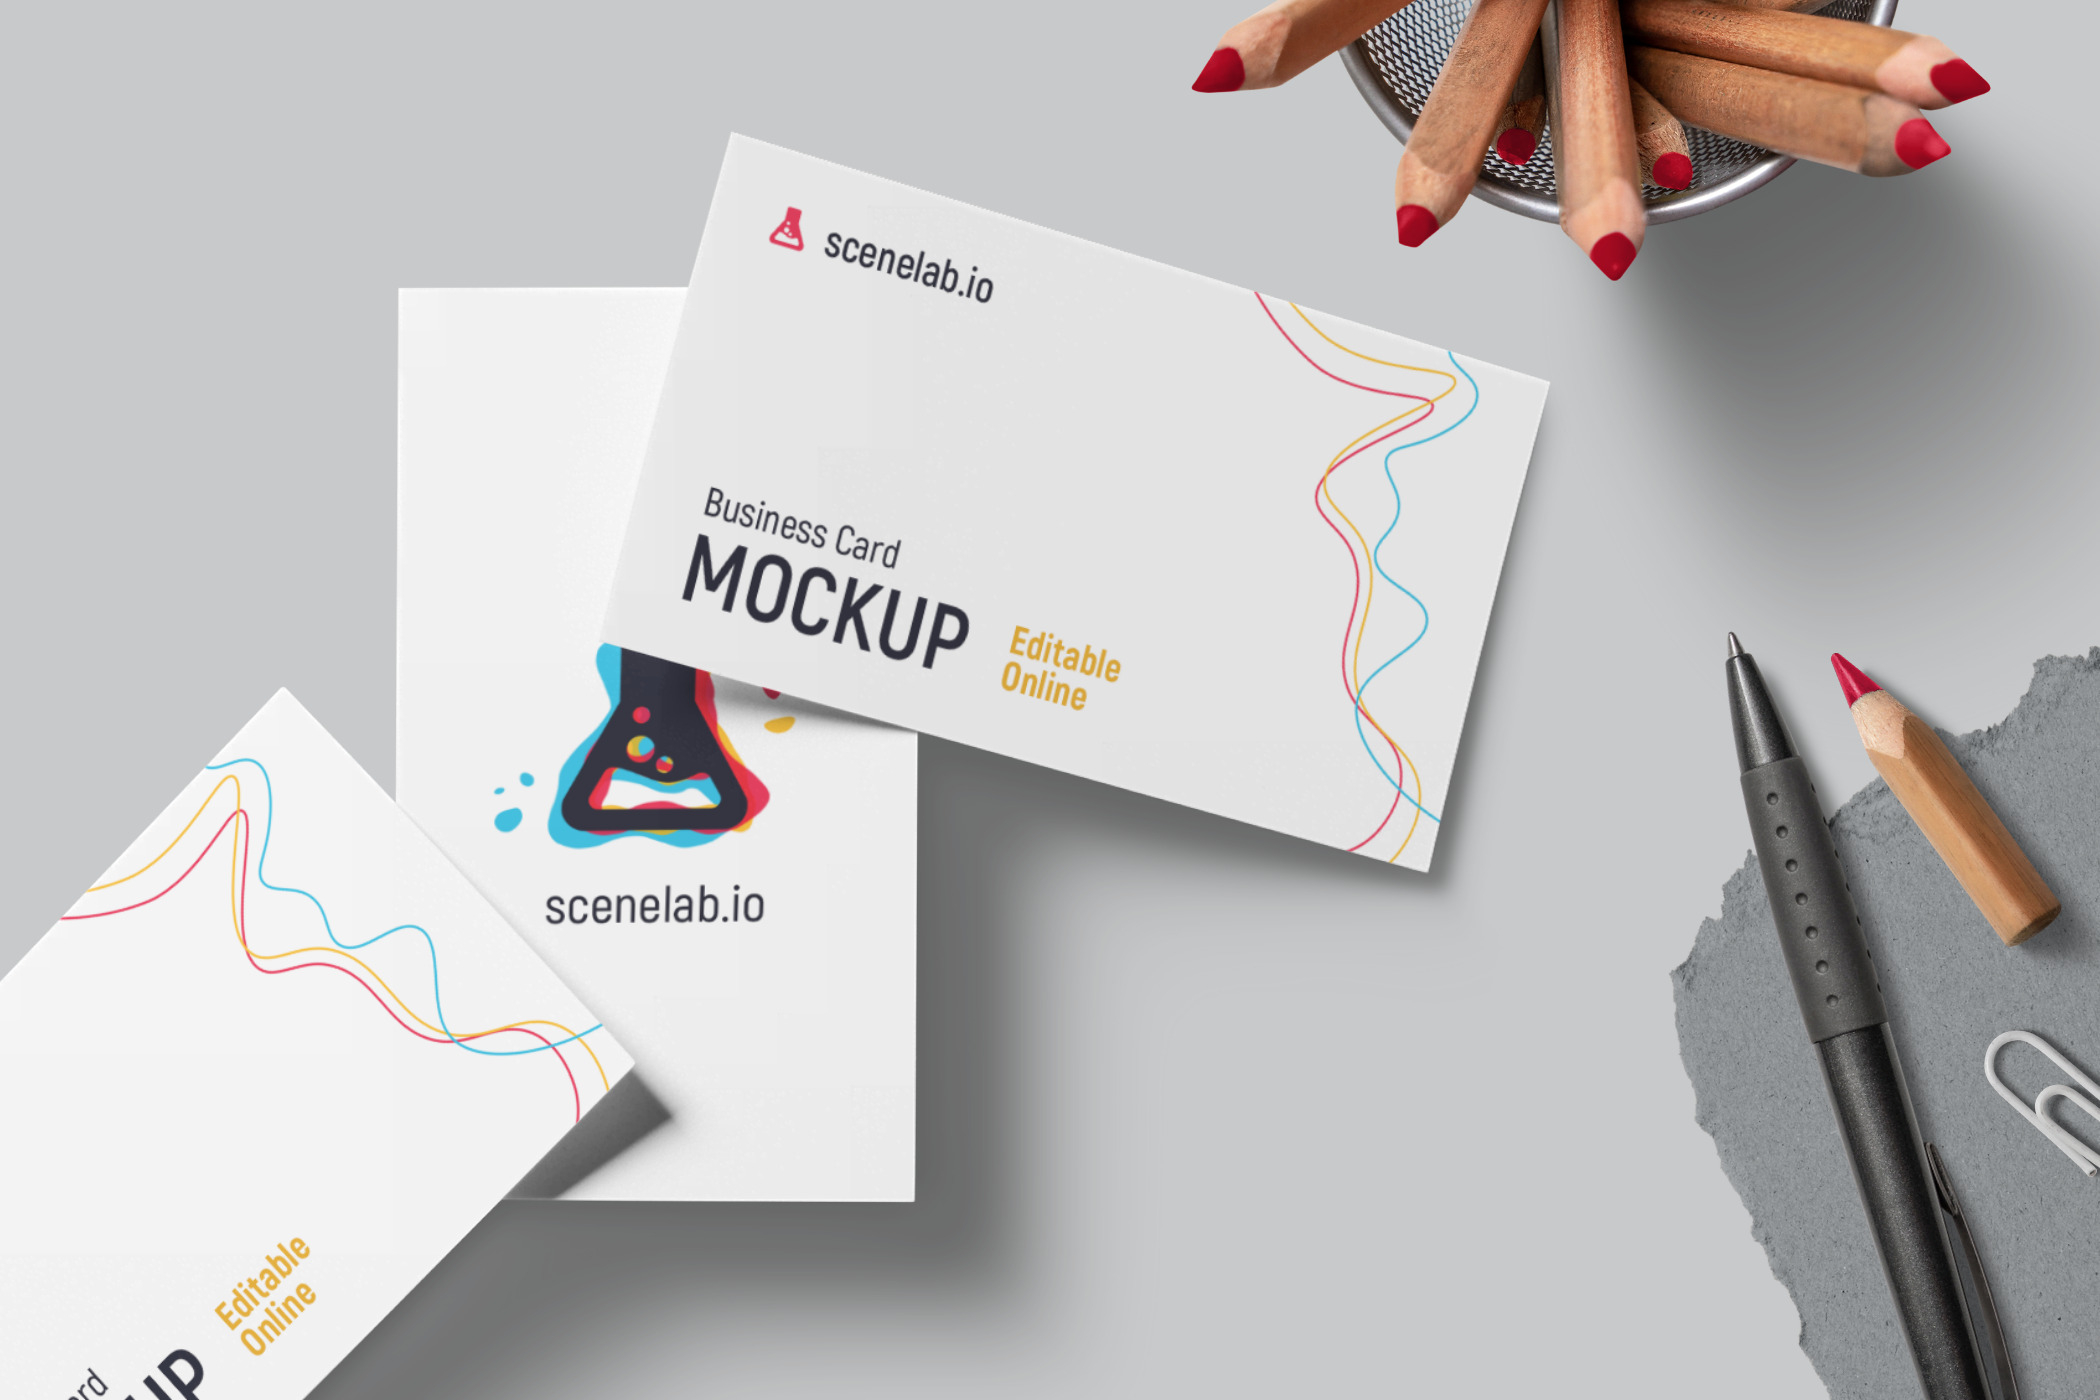 Download 5 Free Business Card Mockups Without Photoshop | SceneLab ...